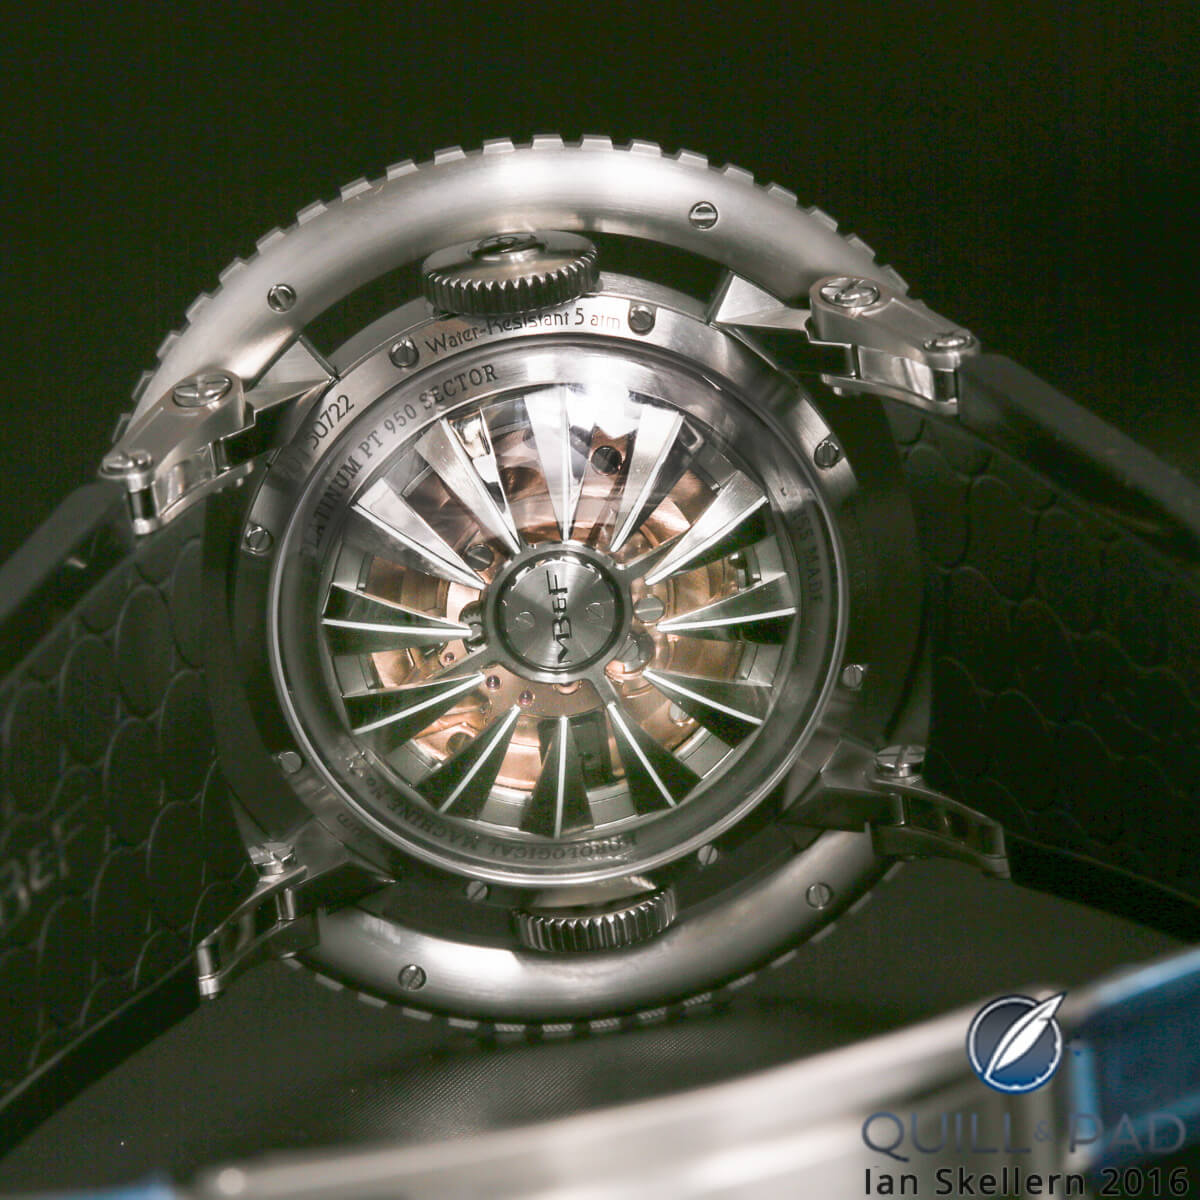 View though the domed display back of the MB&F HM7 Aquapod to the jellyfish-tentacle-like automatic winding rotor